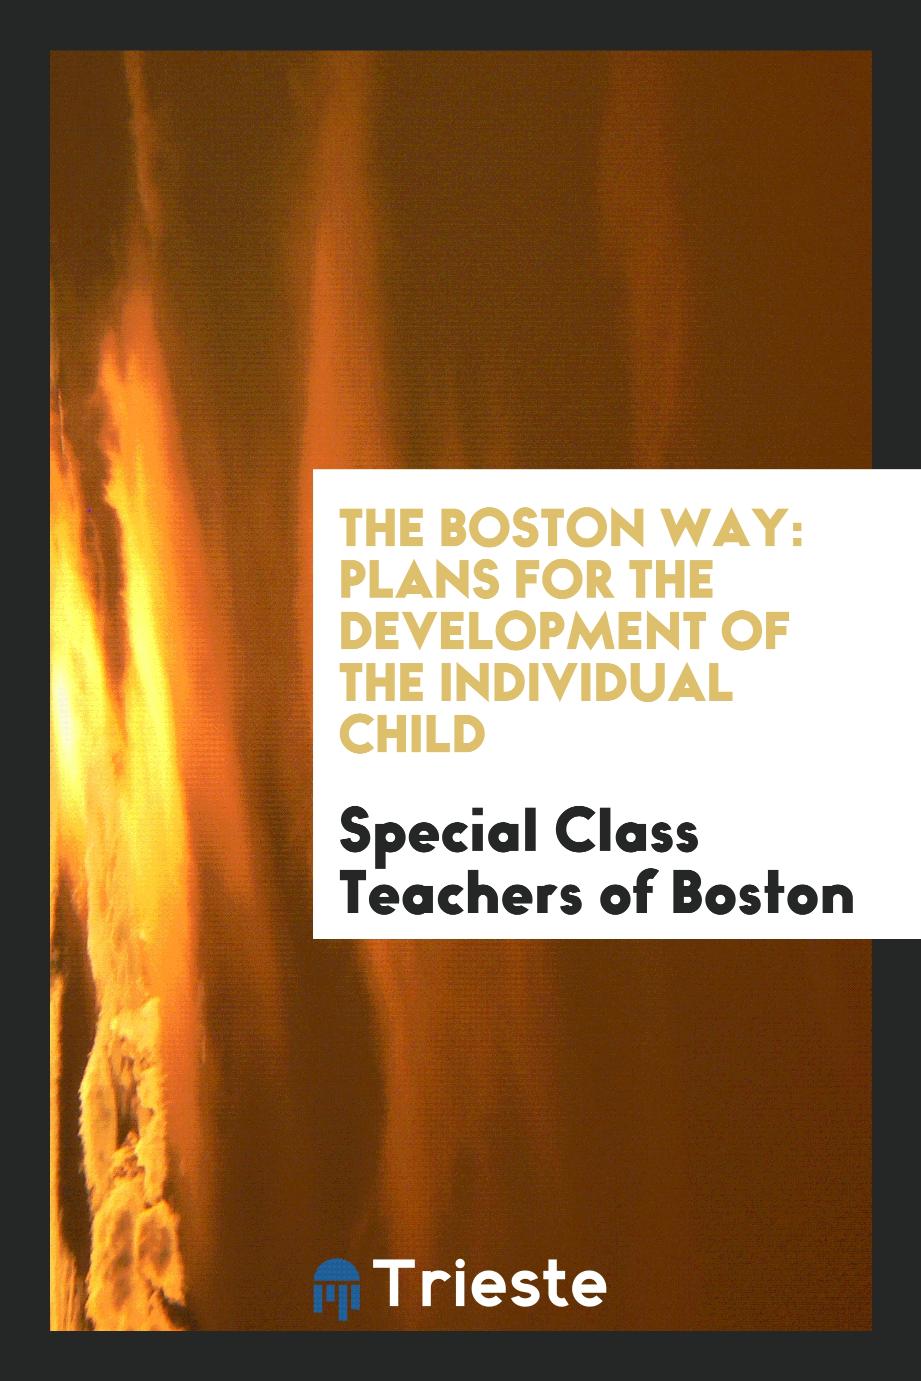 The Boston Way: Plans for the Development of the Individual Child